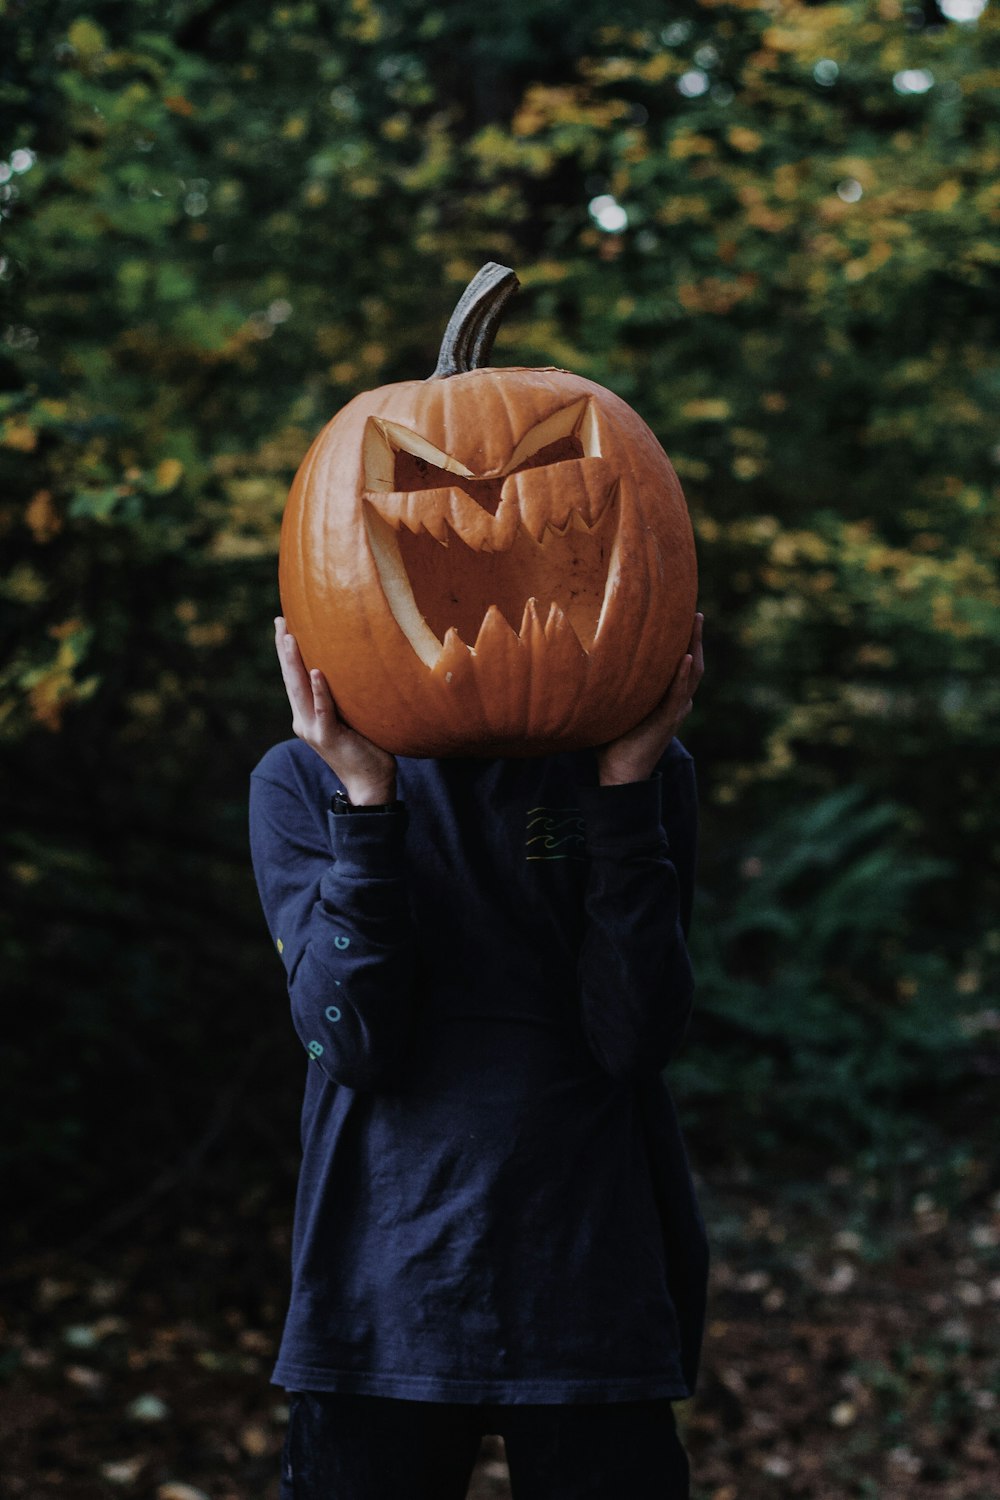 a person holding a carved pumpkin over their head